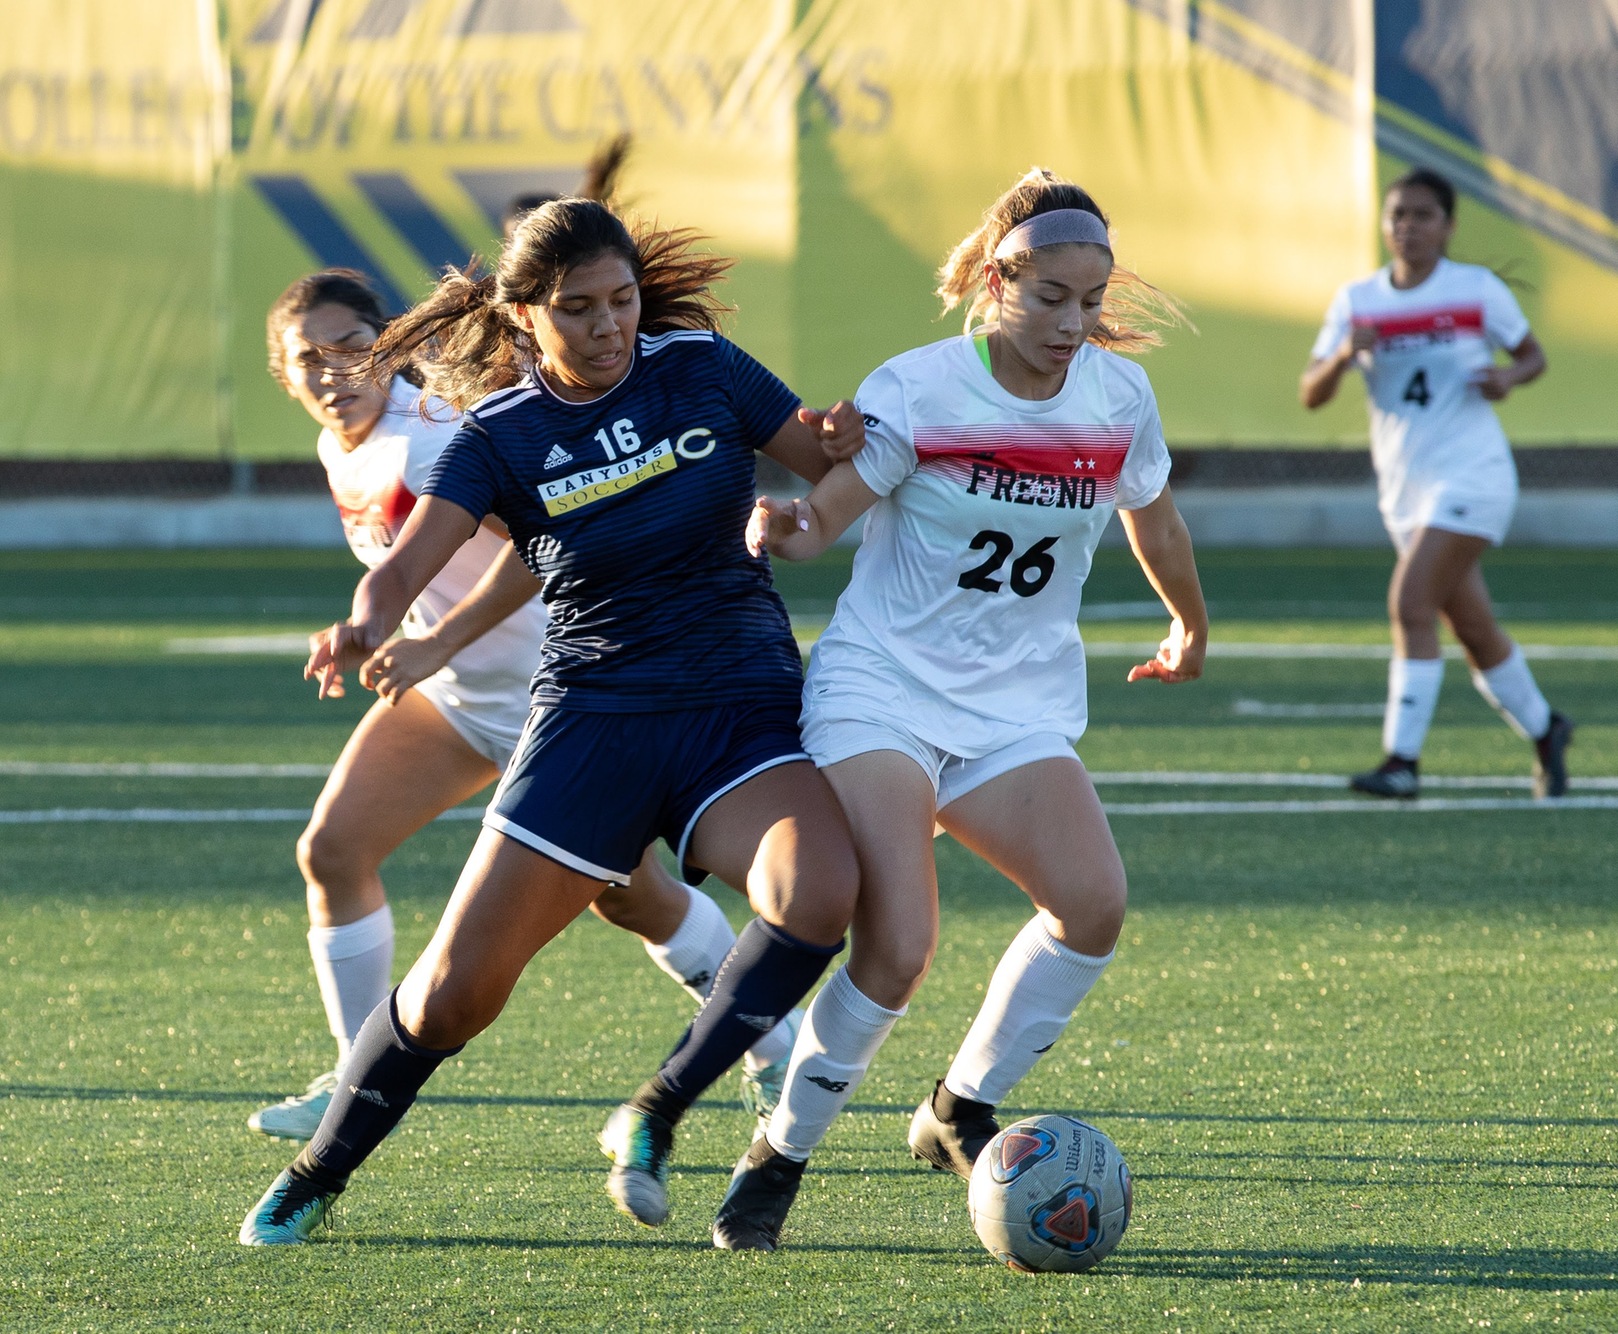 College of the Canyons sophomore midfielder Crystal Sanchez goes for the ball during the first half of the Cougars' match vs. No. 4 state ranked Fresno City College. Jacob Velarde/COC Sports Information.